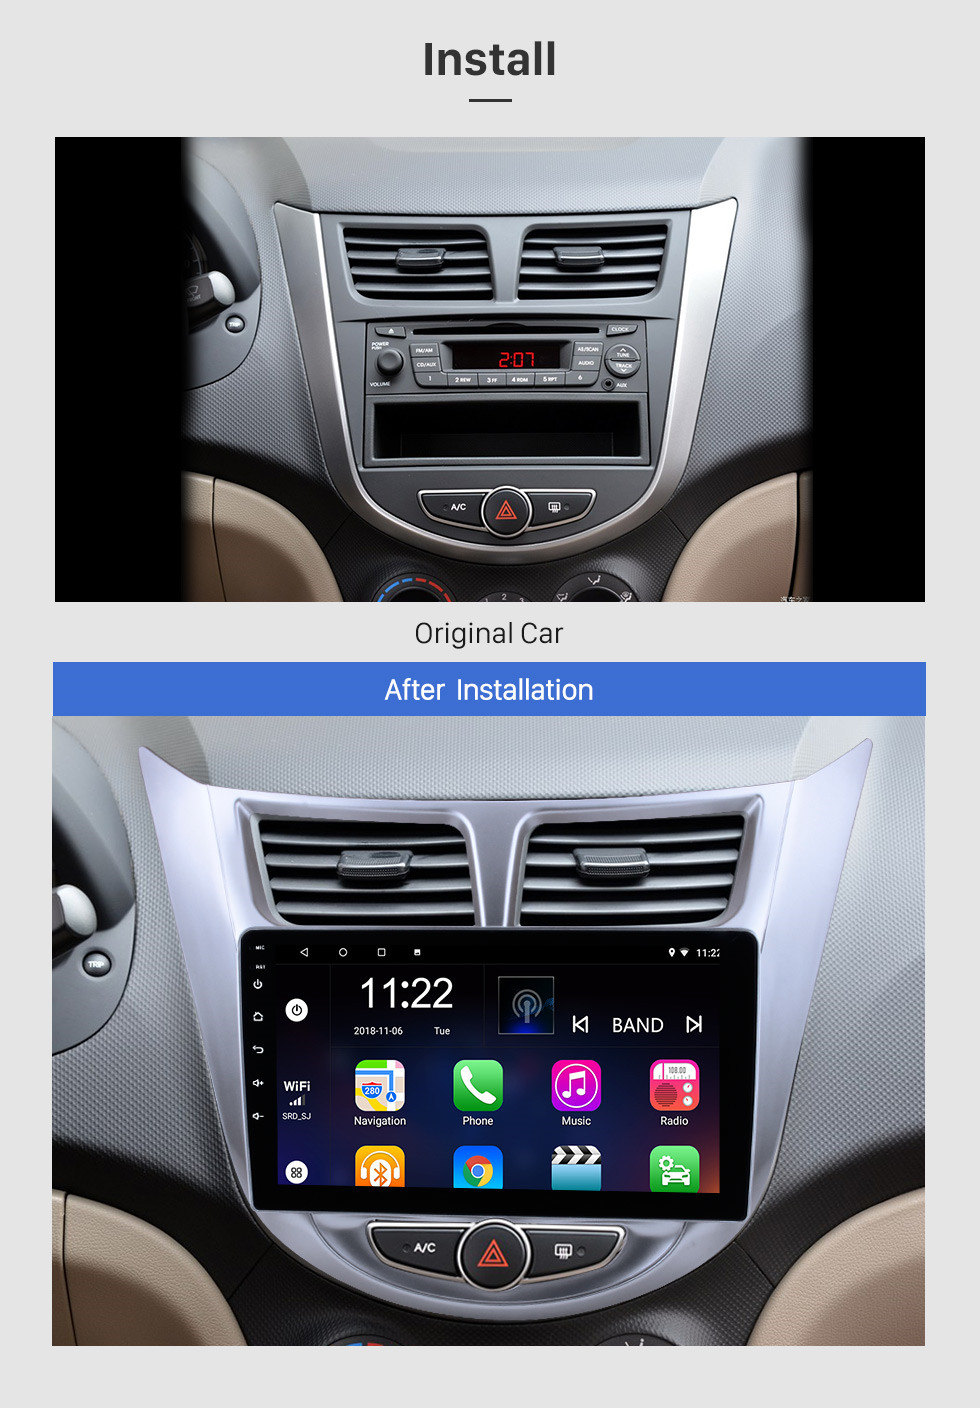 Seicane 9 inch HD 1024*600 Android 13.0 2011 2012 2013 Hyundai Verna Accent Solaris Radio Upgrade GPS Navigation Aftermarket Car Stereo Multi-touch Capacitive Screen Bluetooth Music  WiFi Mirror Link OBD2 MP3 MP4